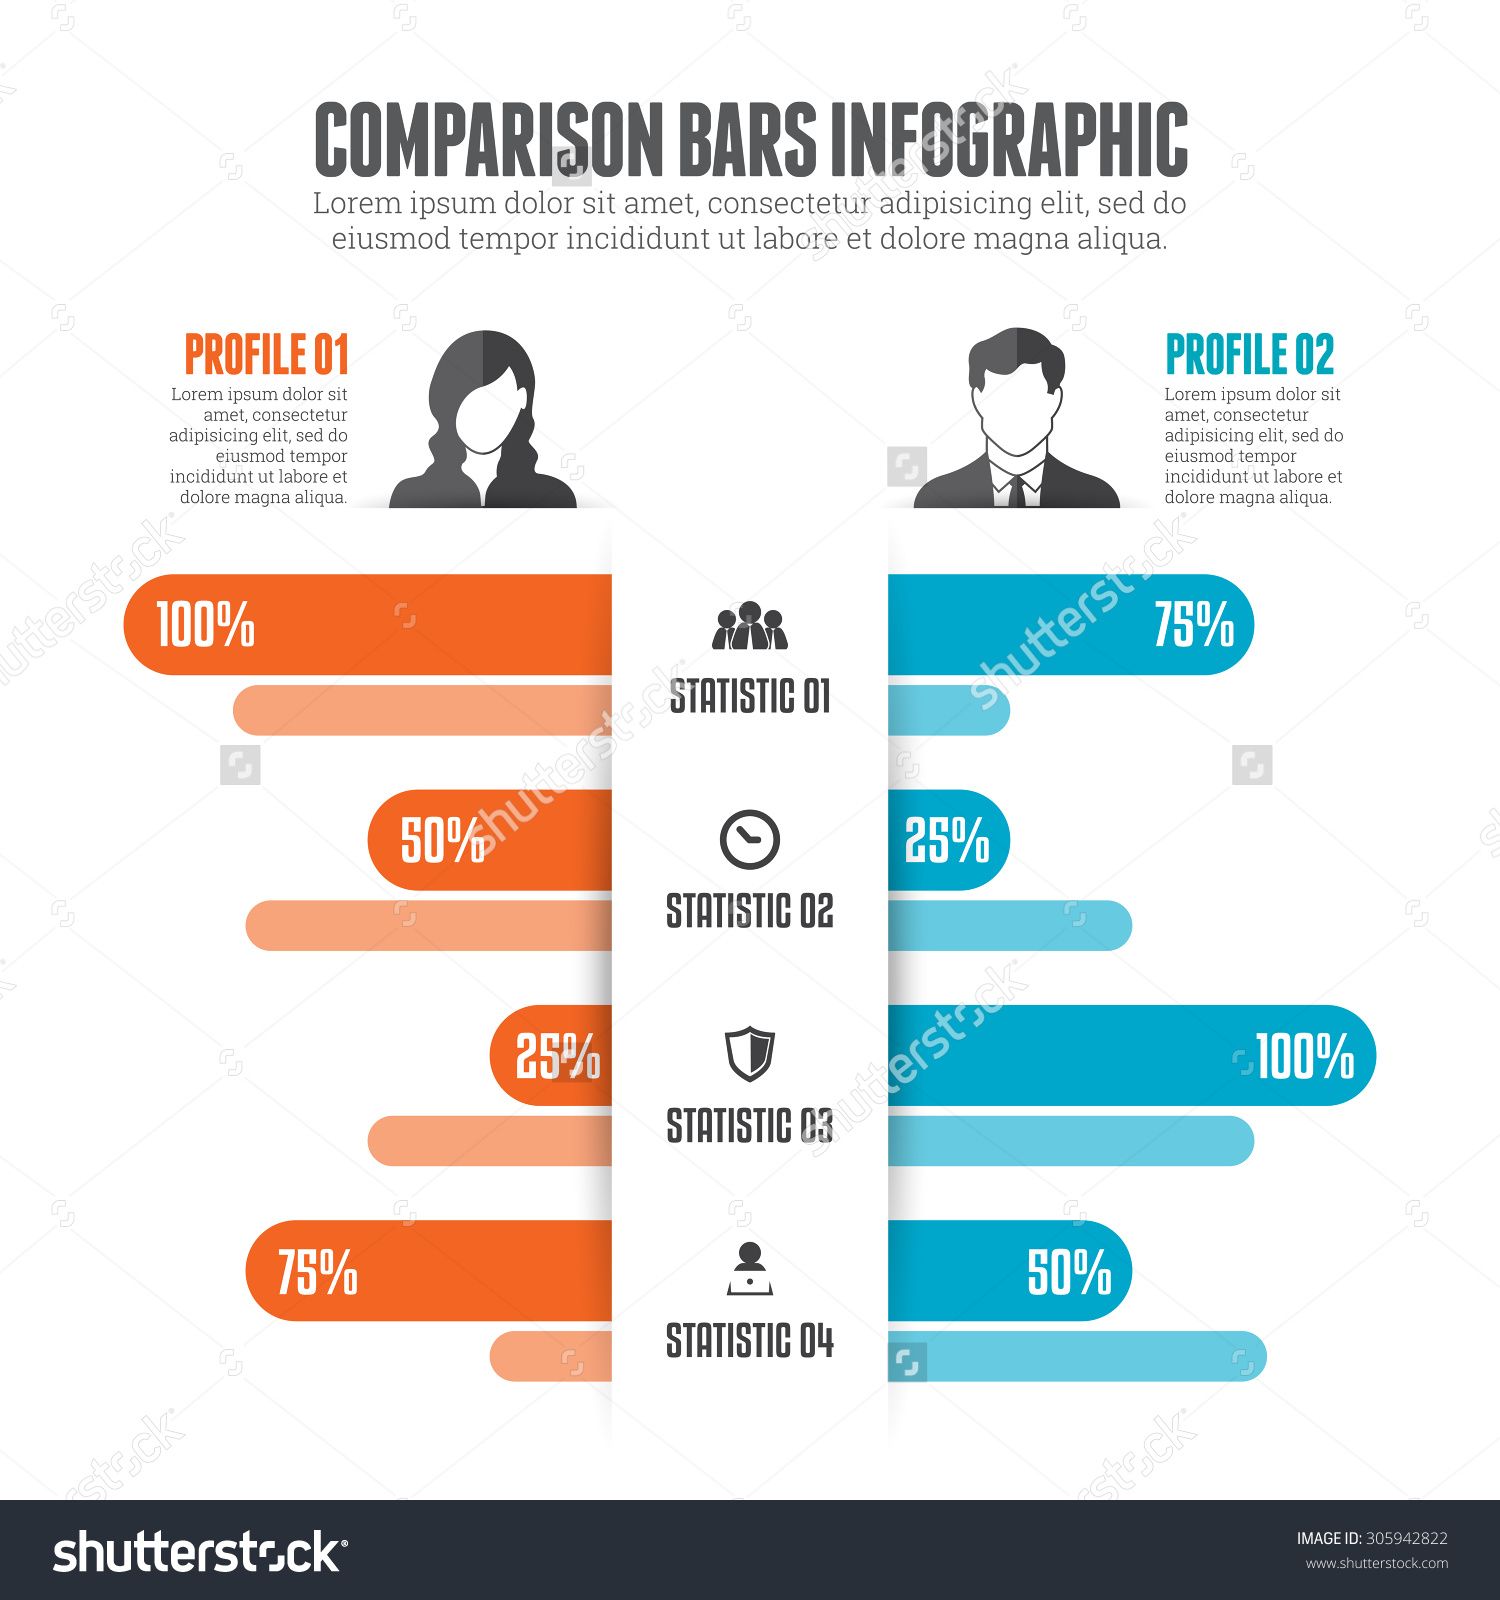 20 Comparison Infographic Templates and Data Visualization Tips - Venngage